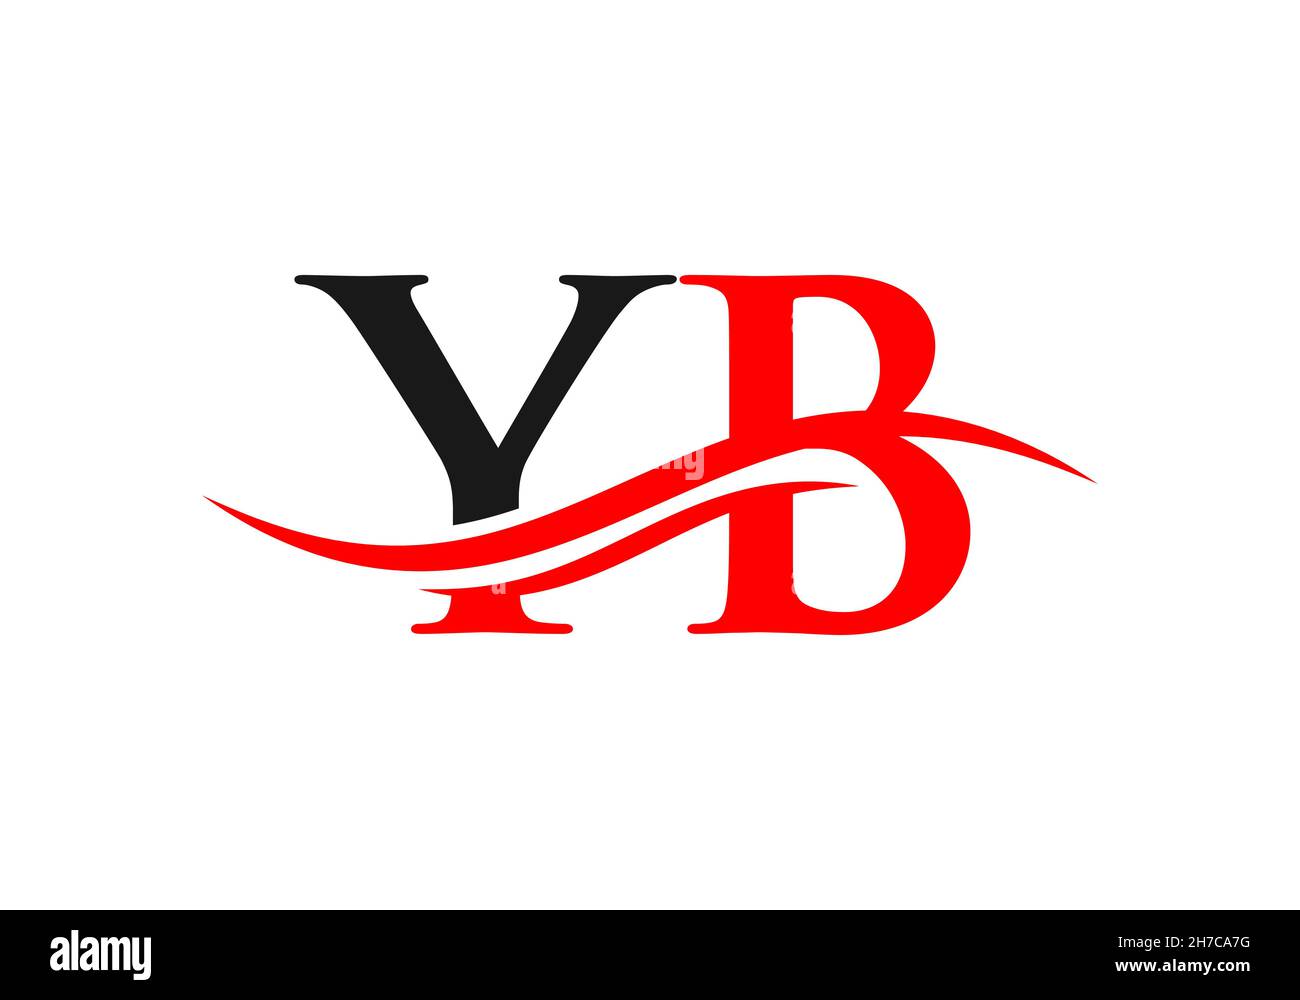 Yb logo hi-res stock photography and images - Alamy